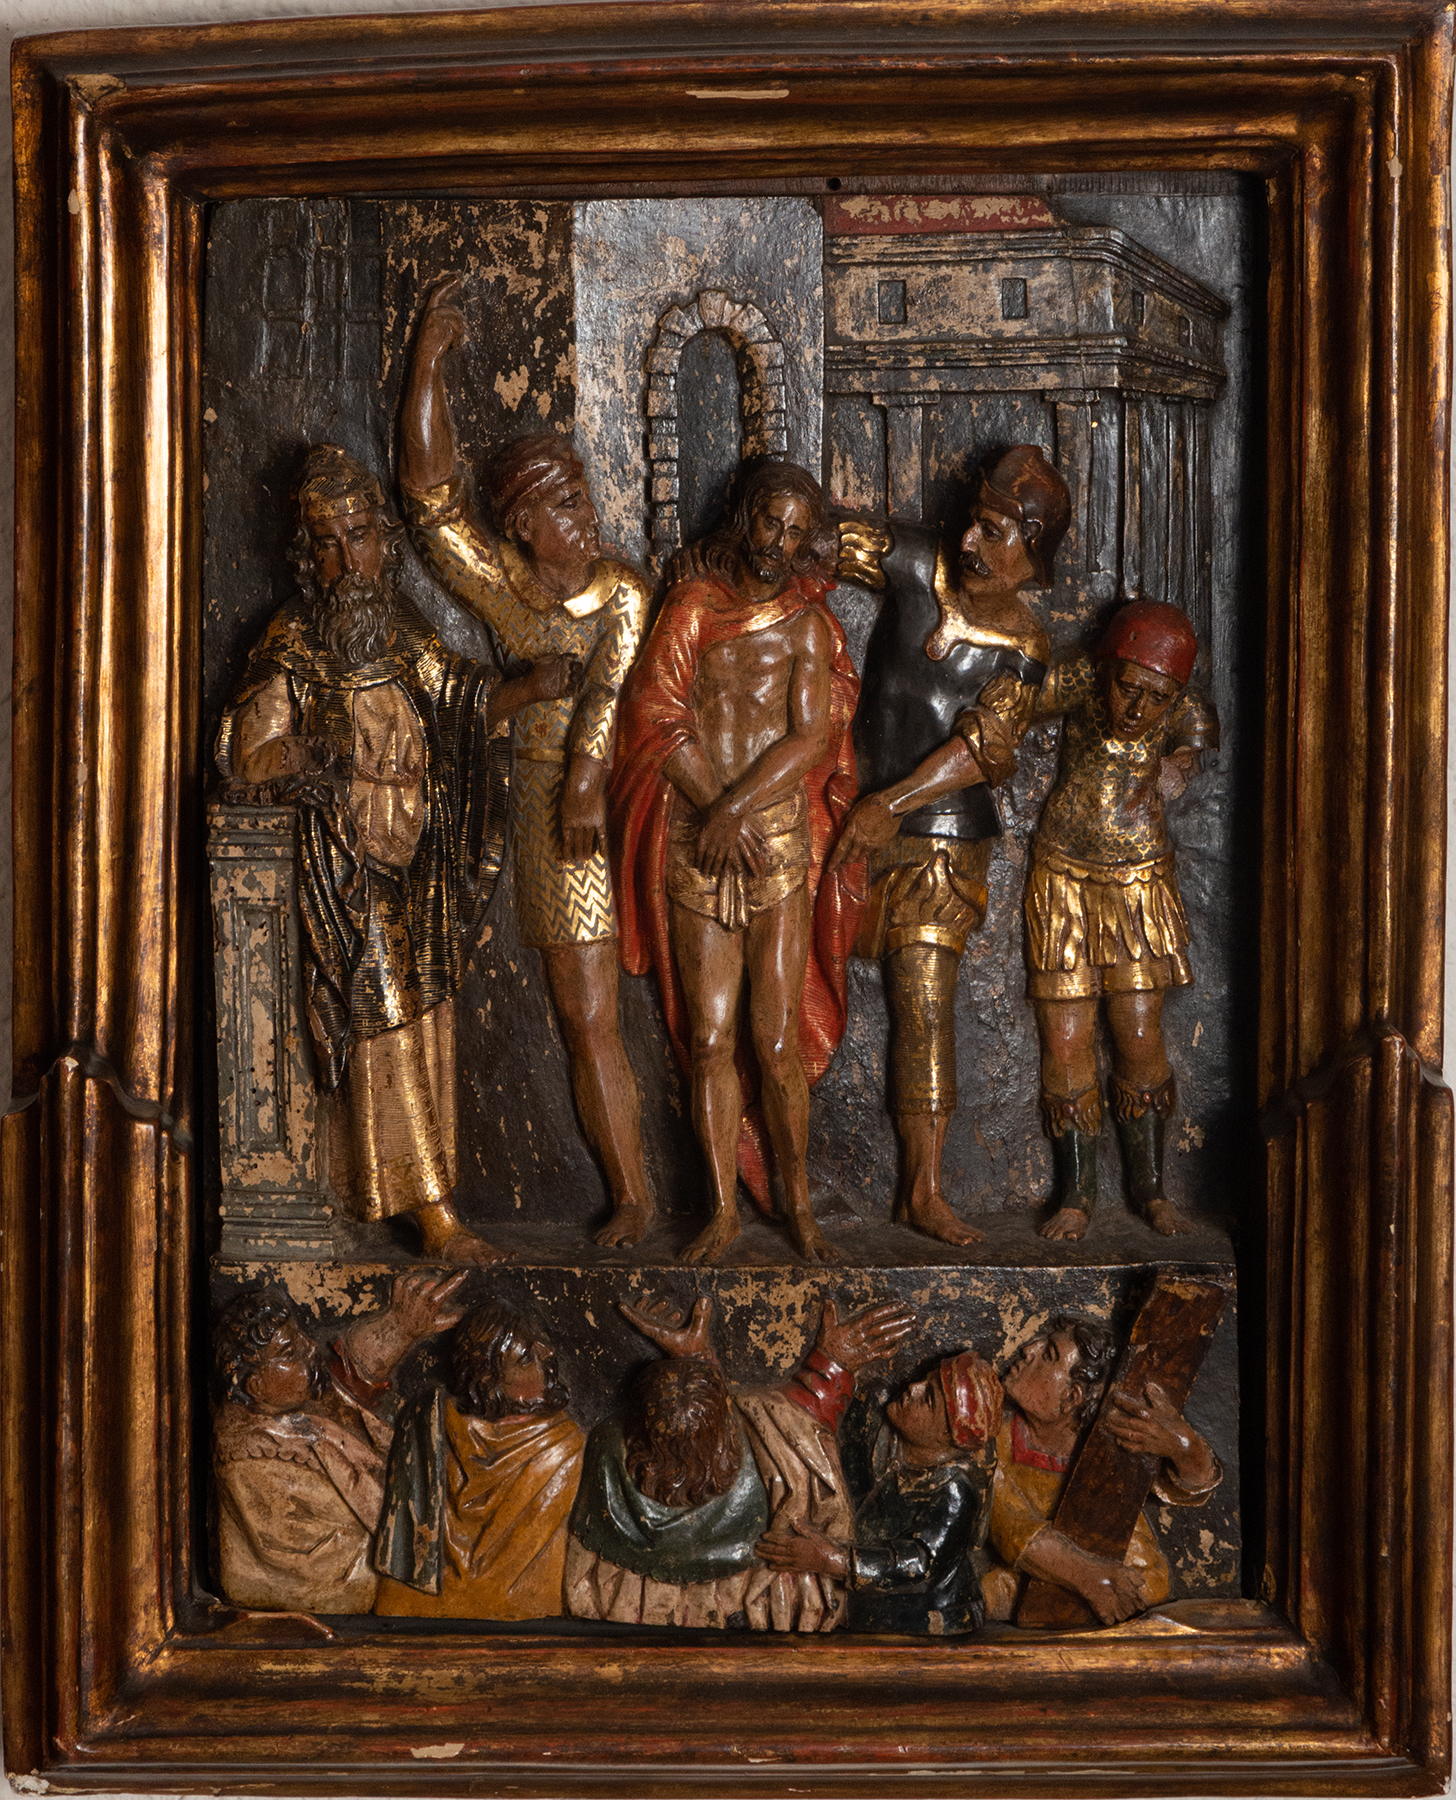 Important relief of The Arrest of Christ, Late Gothic school from the second half of the 15th centur